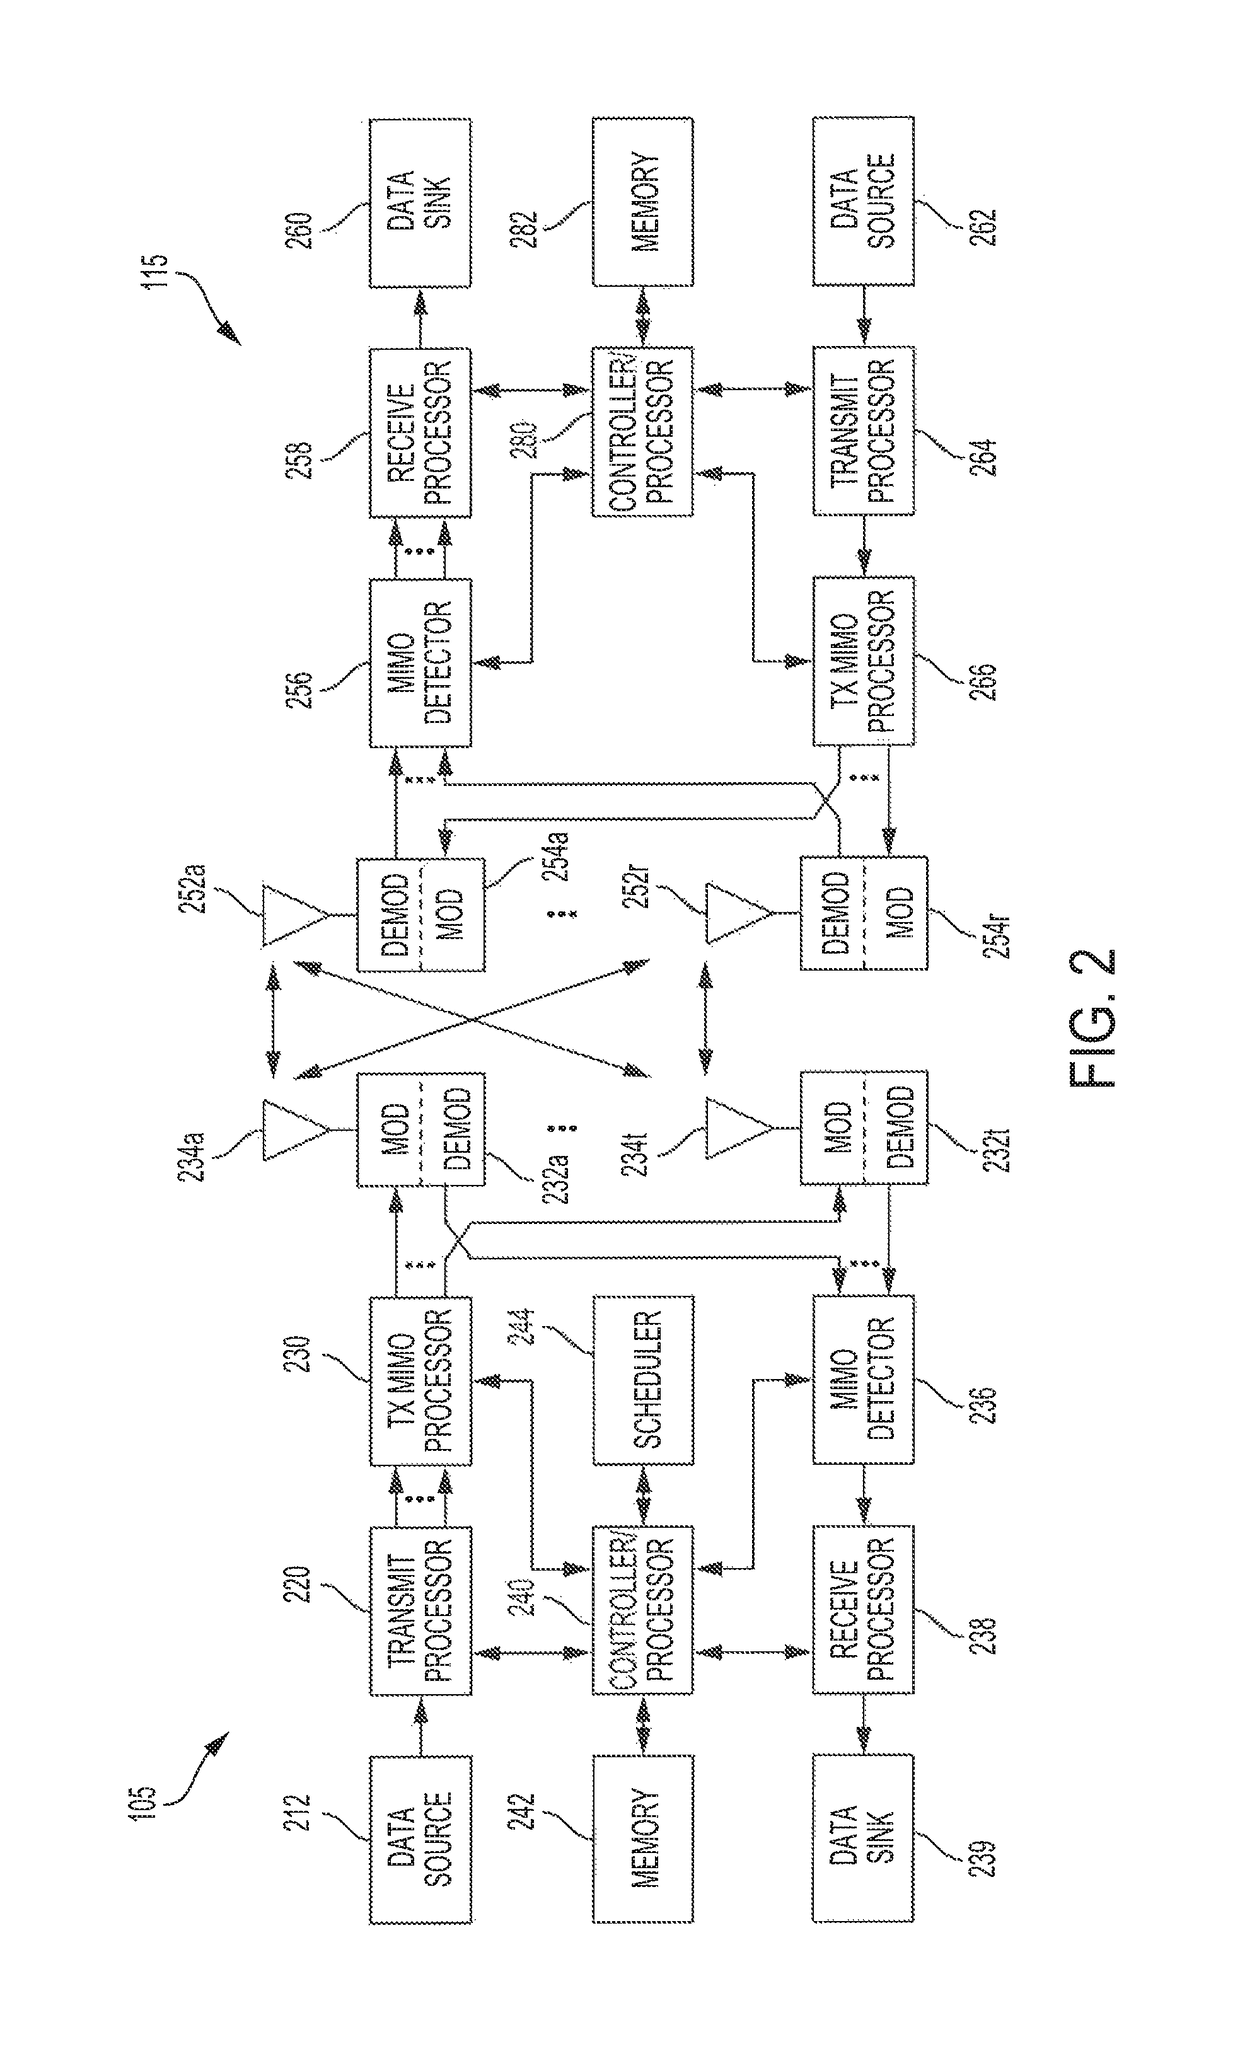 Methods for beam switching in millimeter wave systems to manage thermal constraints